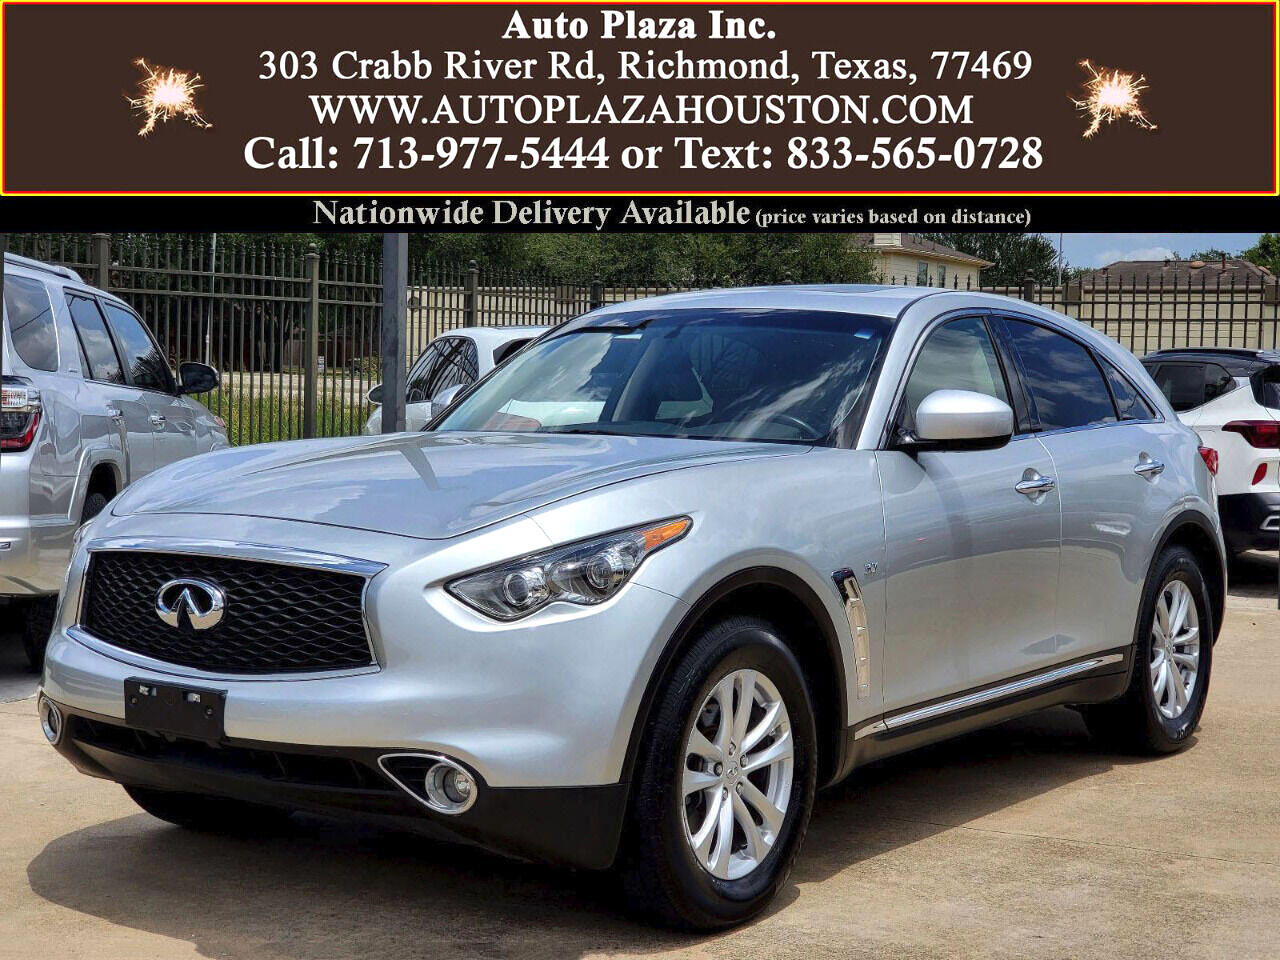 Preowned 2017 INFINITI QX70 Base for sale by Auto Plaza Inc in Richmond, TX